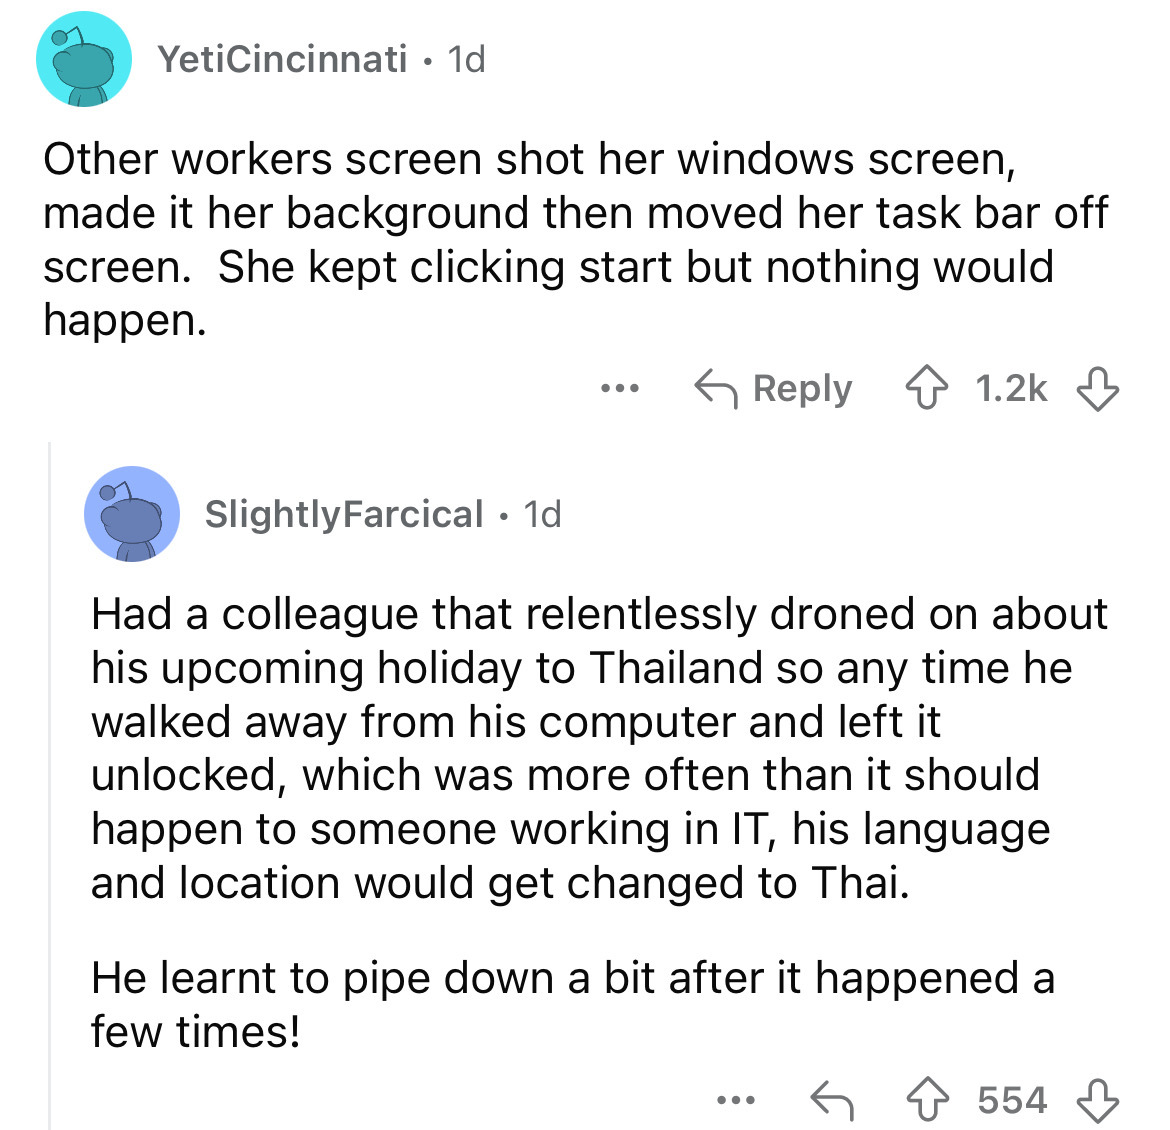 screenshot - YetiCincinnati 1d Other workers screen shot her windows screen, made it her background then moved her task bar off screen. She kept clicking start but nothing would happen. ... Slightly Farcical 1d Had a colleague that relentlessly droned on 